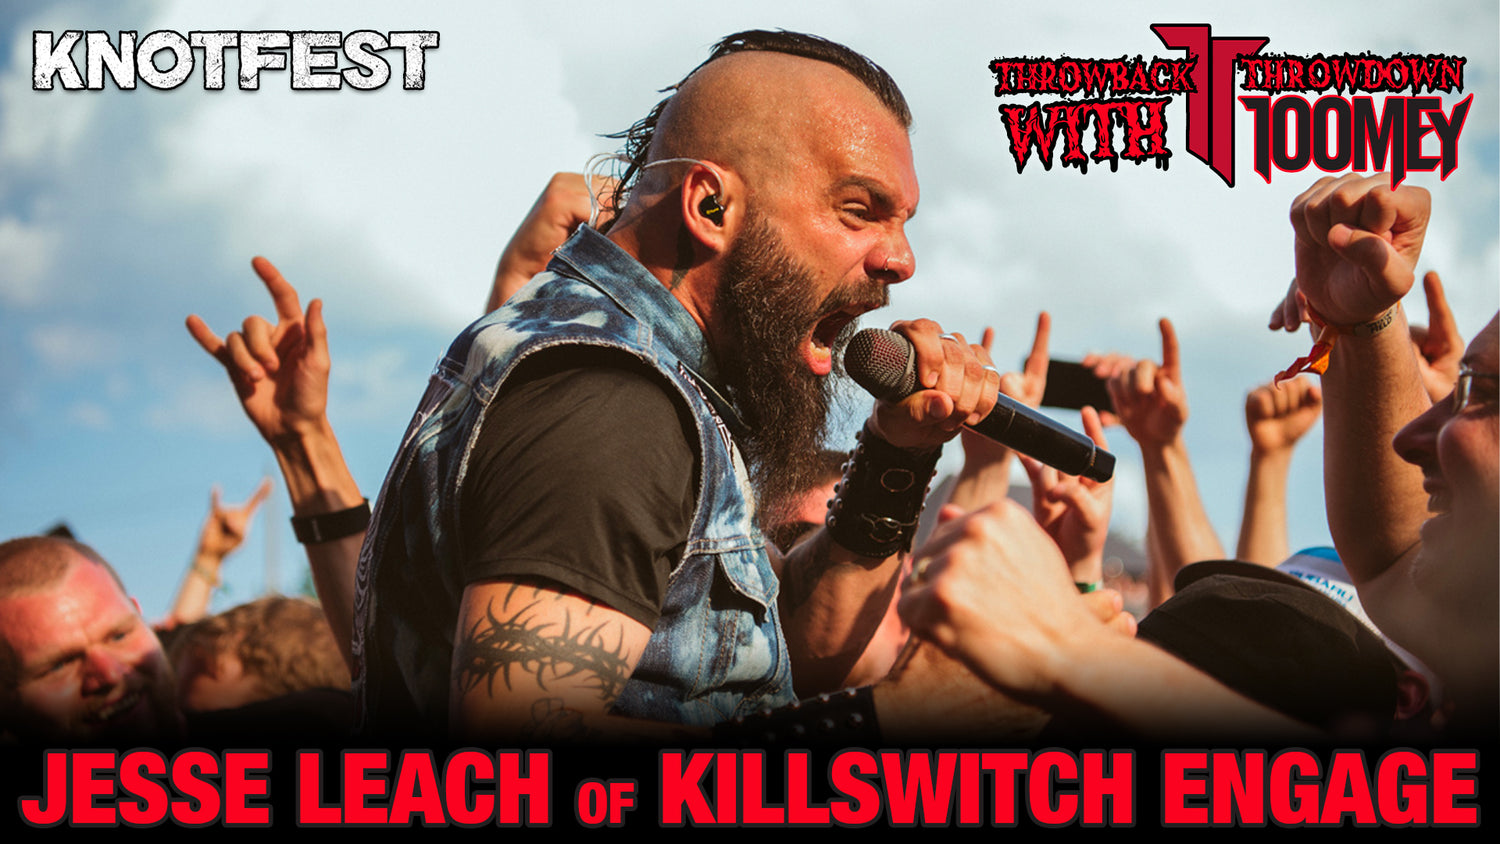 Jesse Leach (Killswitch Engage) on Howard Jones and their friendship